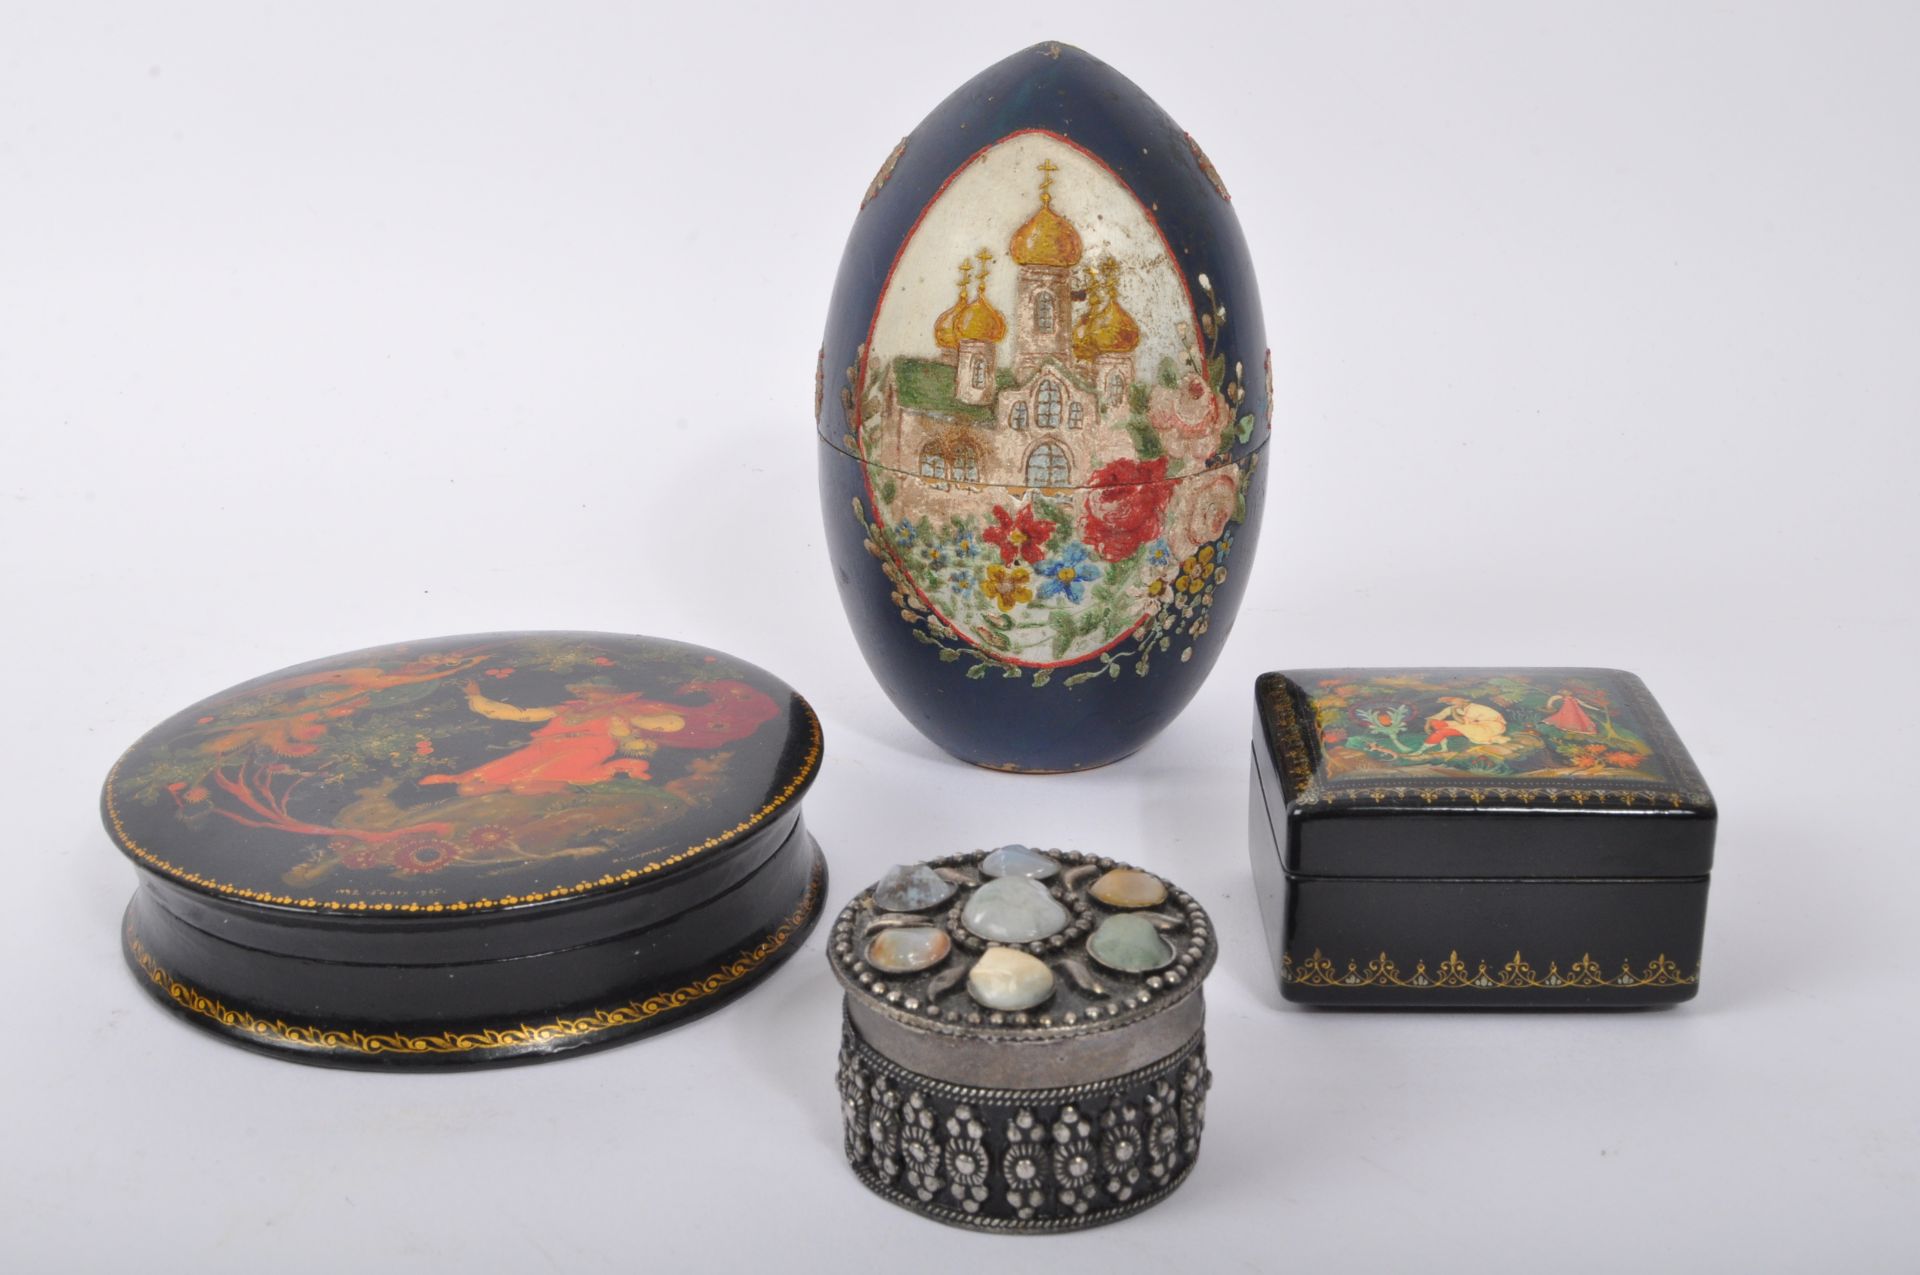 VINTAGE RUSSIAN WOODEN CONTINENTAL HAND PAINTED BOXES